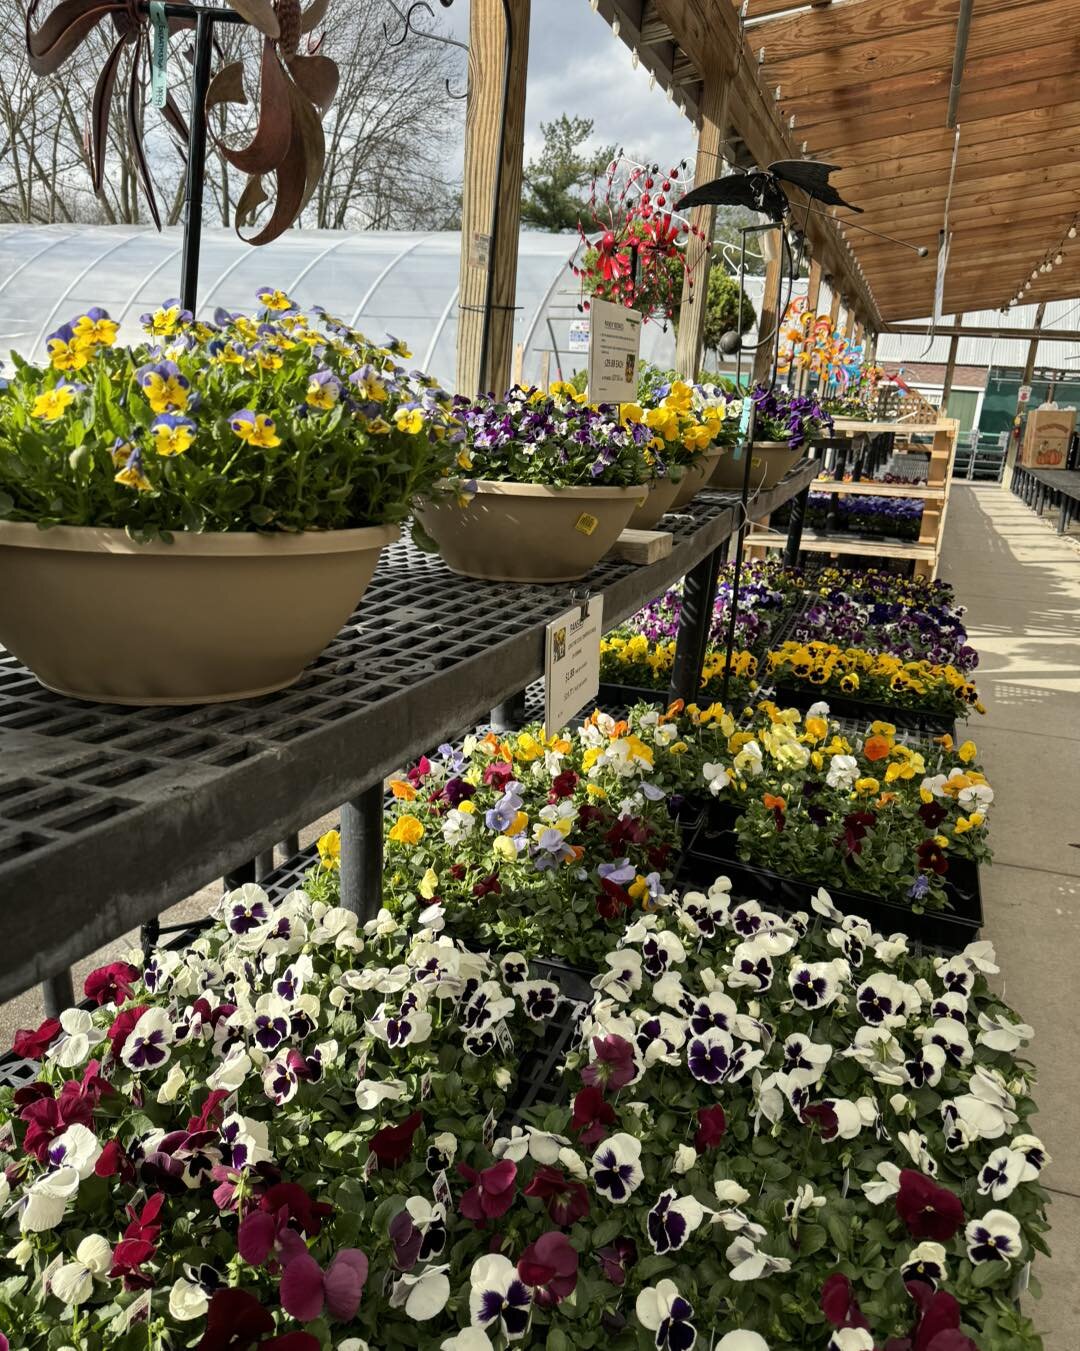 TGIF!
.
Come see us this weekend to grab your pansies, cold crop veggies, and early spring bloomers and get your spring started!